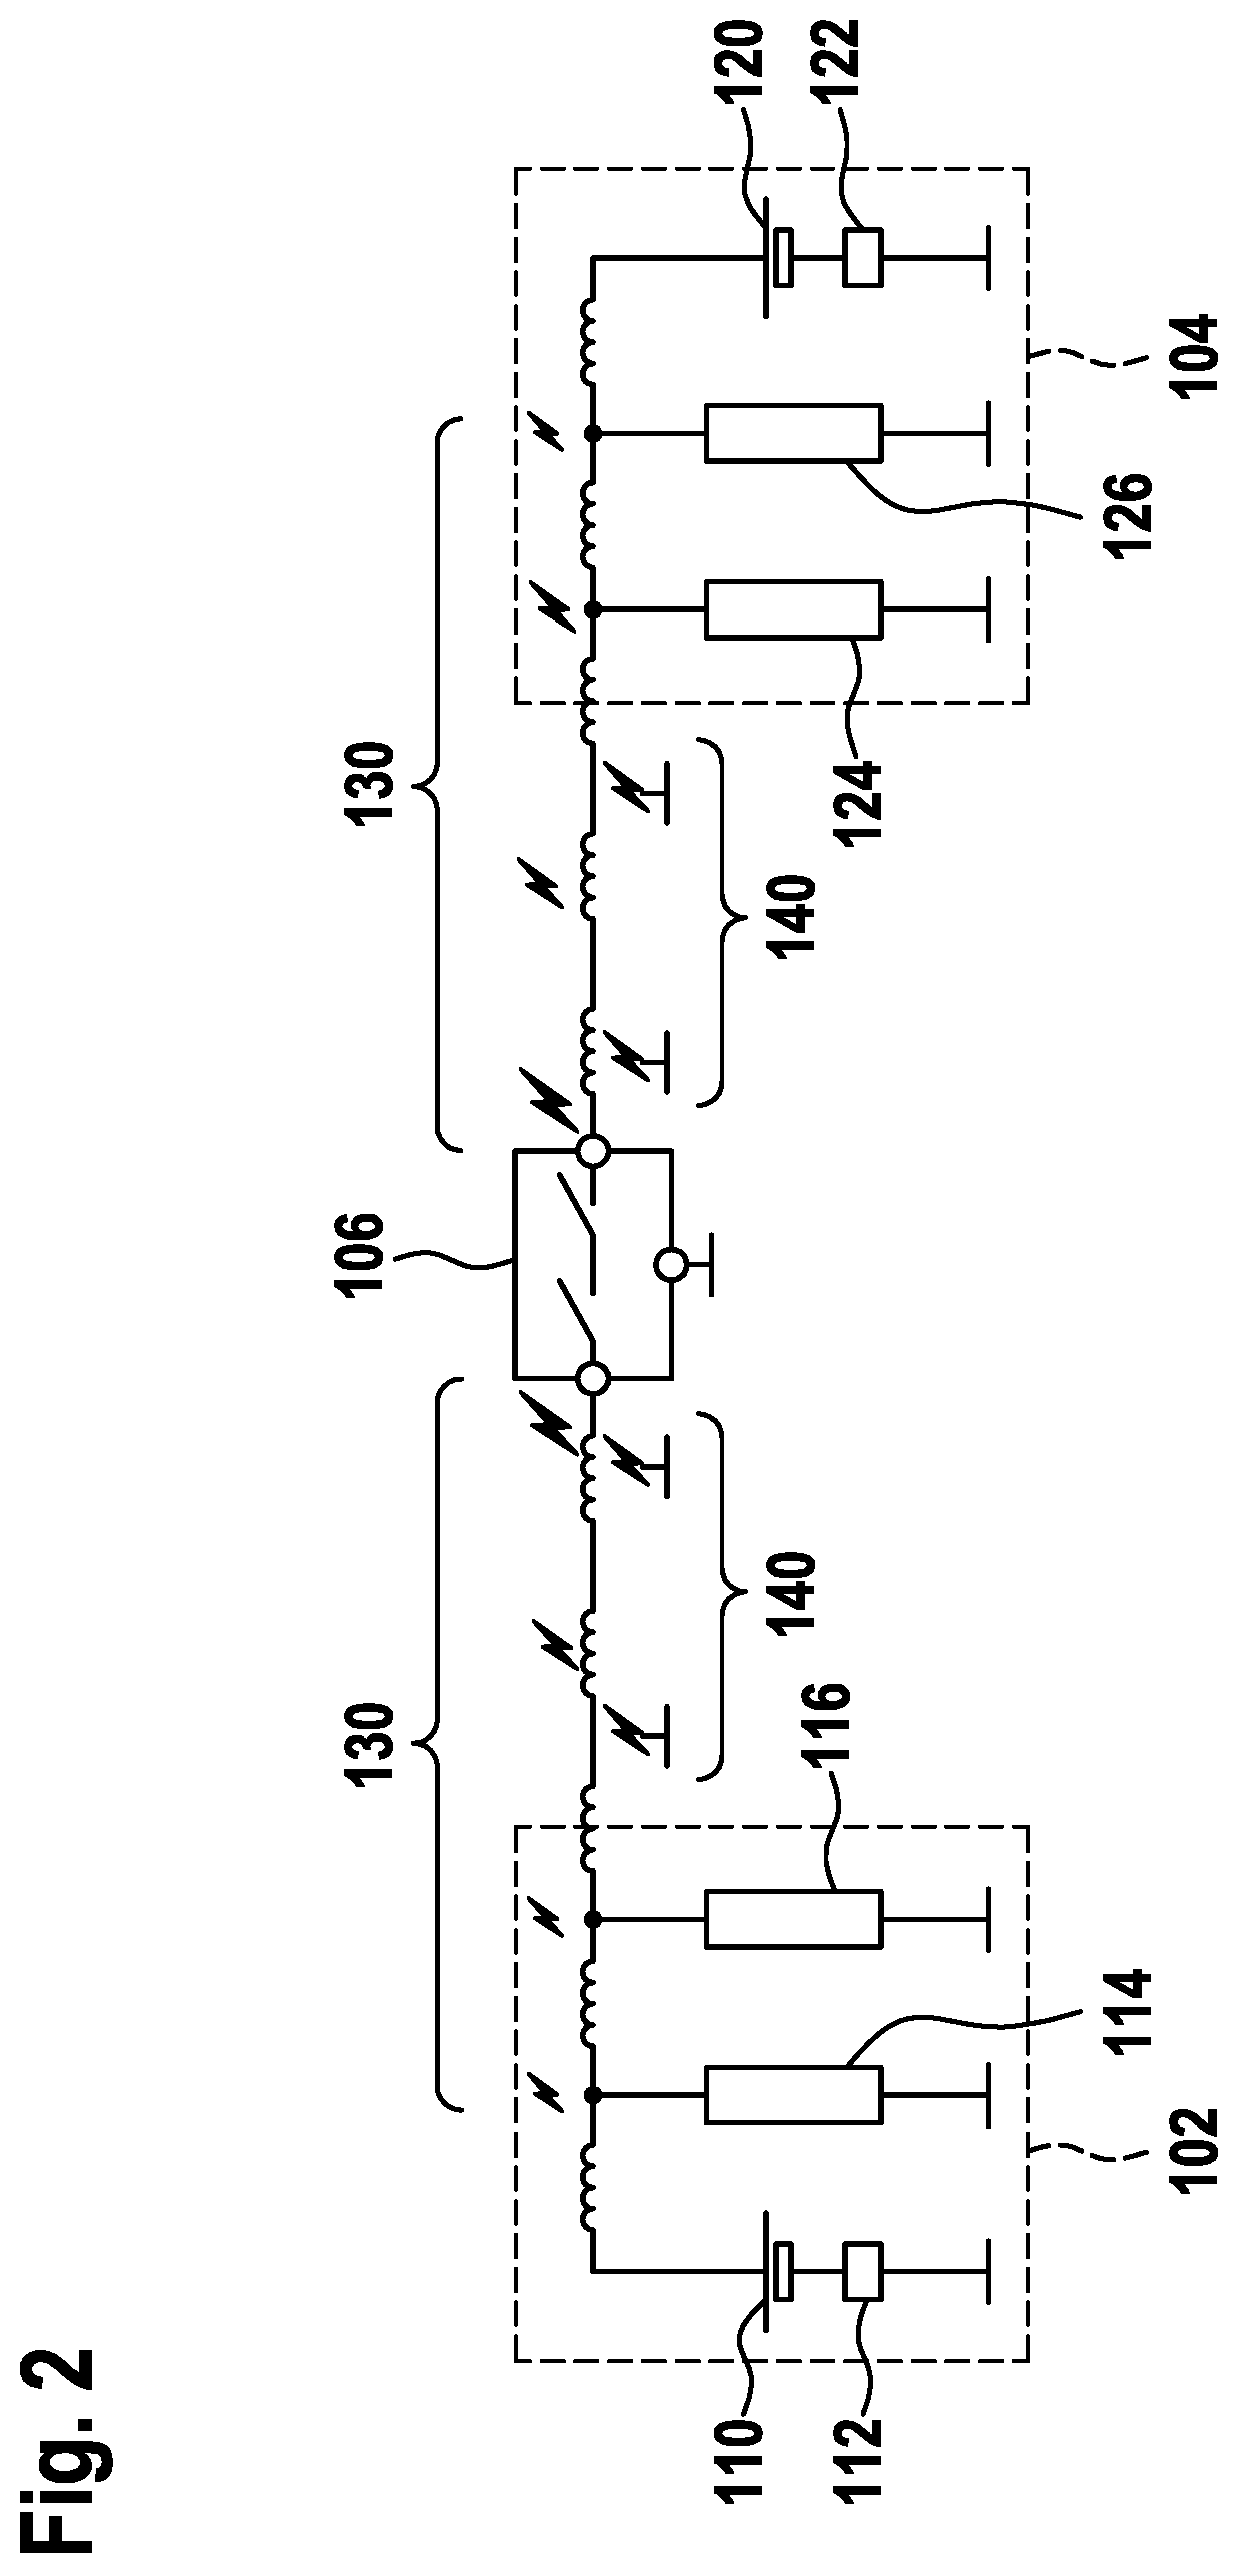 Battery terminal for a vehicle electrical system